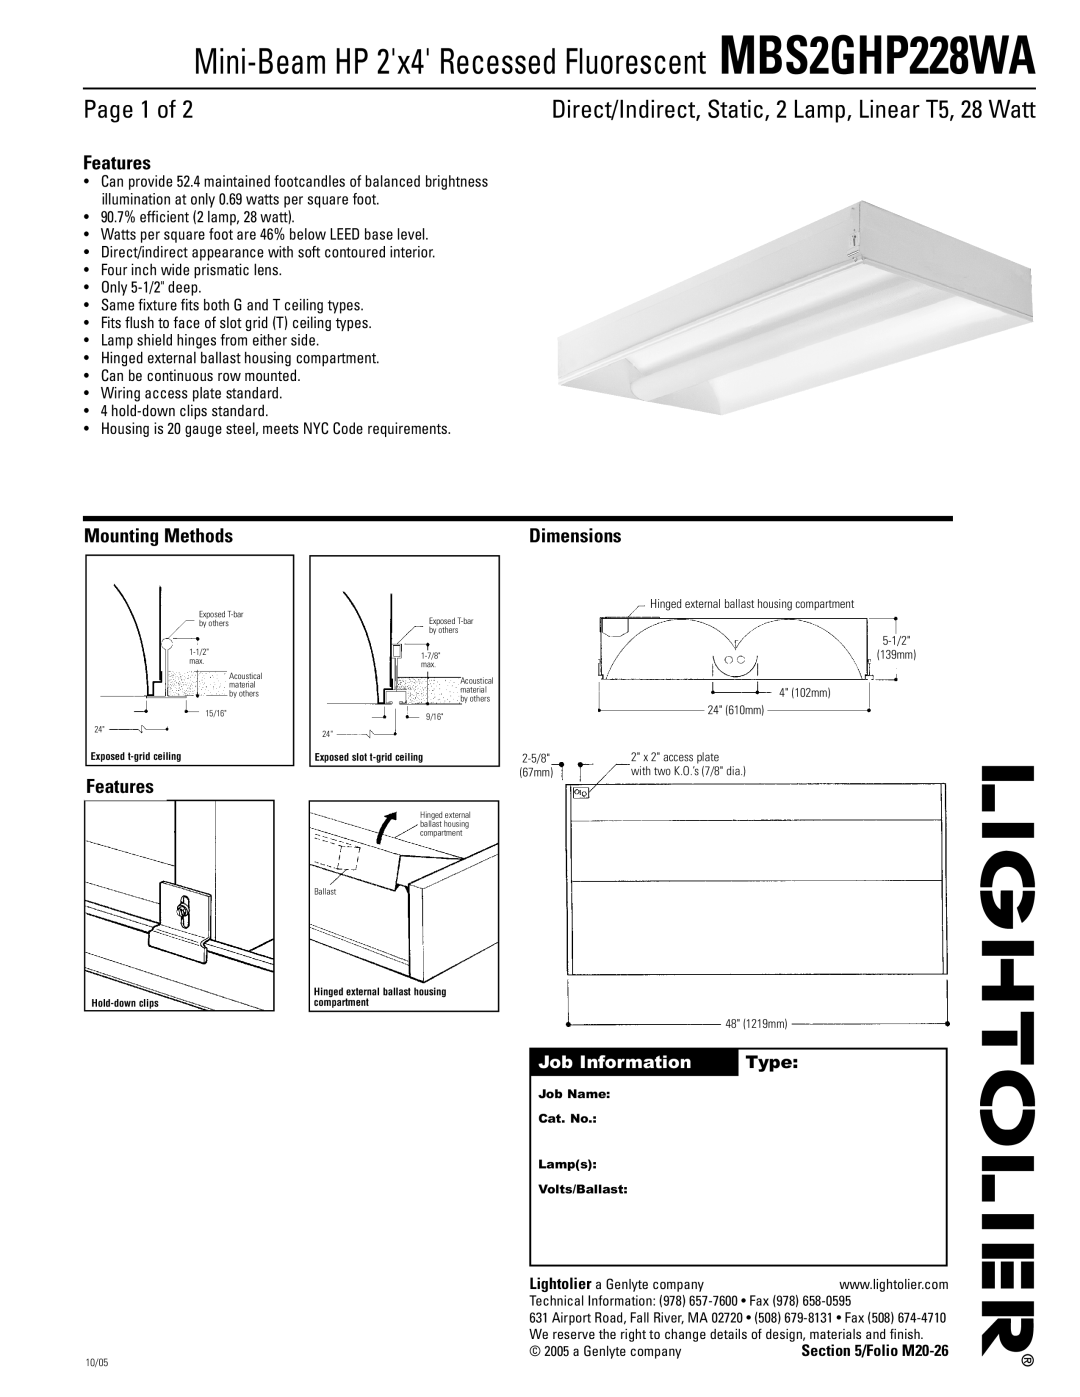 Lightolier dimensions Mini-BeamHP 2x4 Recessed Fluorescent MBS2GHP228WA, Page 1 of, Features, Mounting Methods, Type 